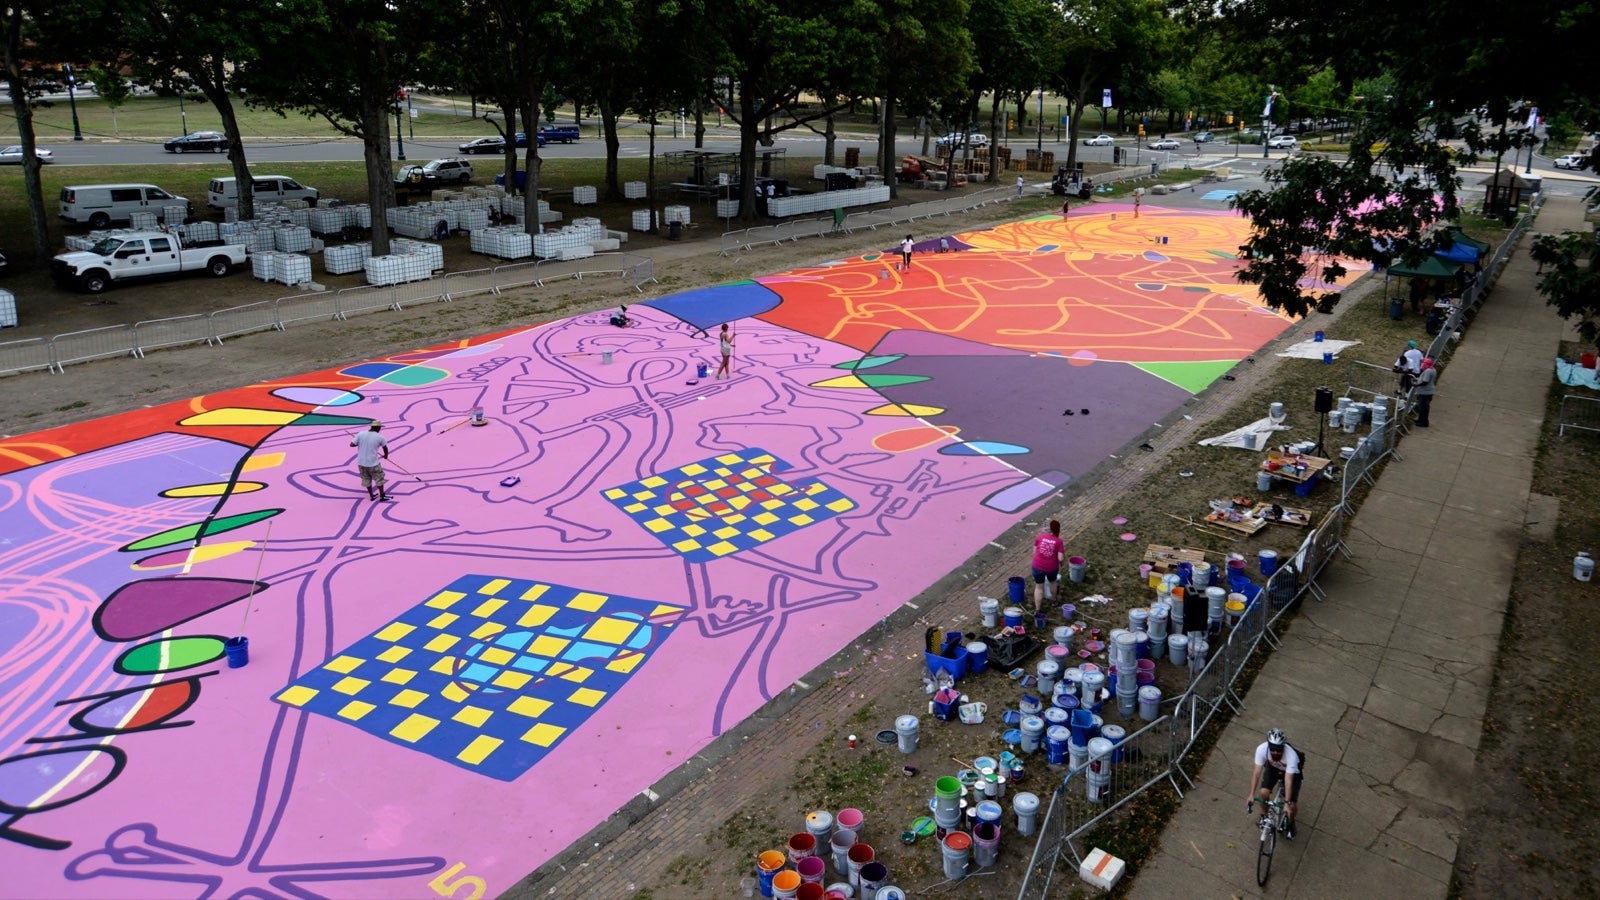 View on 'Rhythm & Hues' at Eakins Oval.  (Bastiaan Slabbers for NewsWorks)